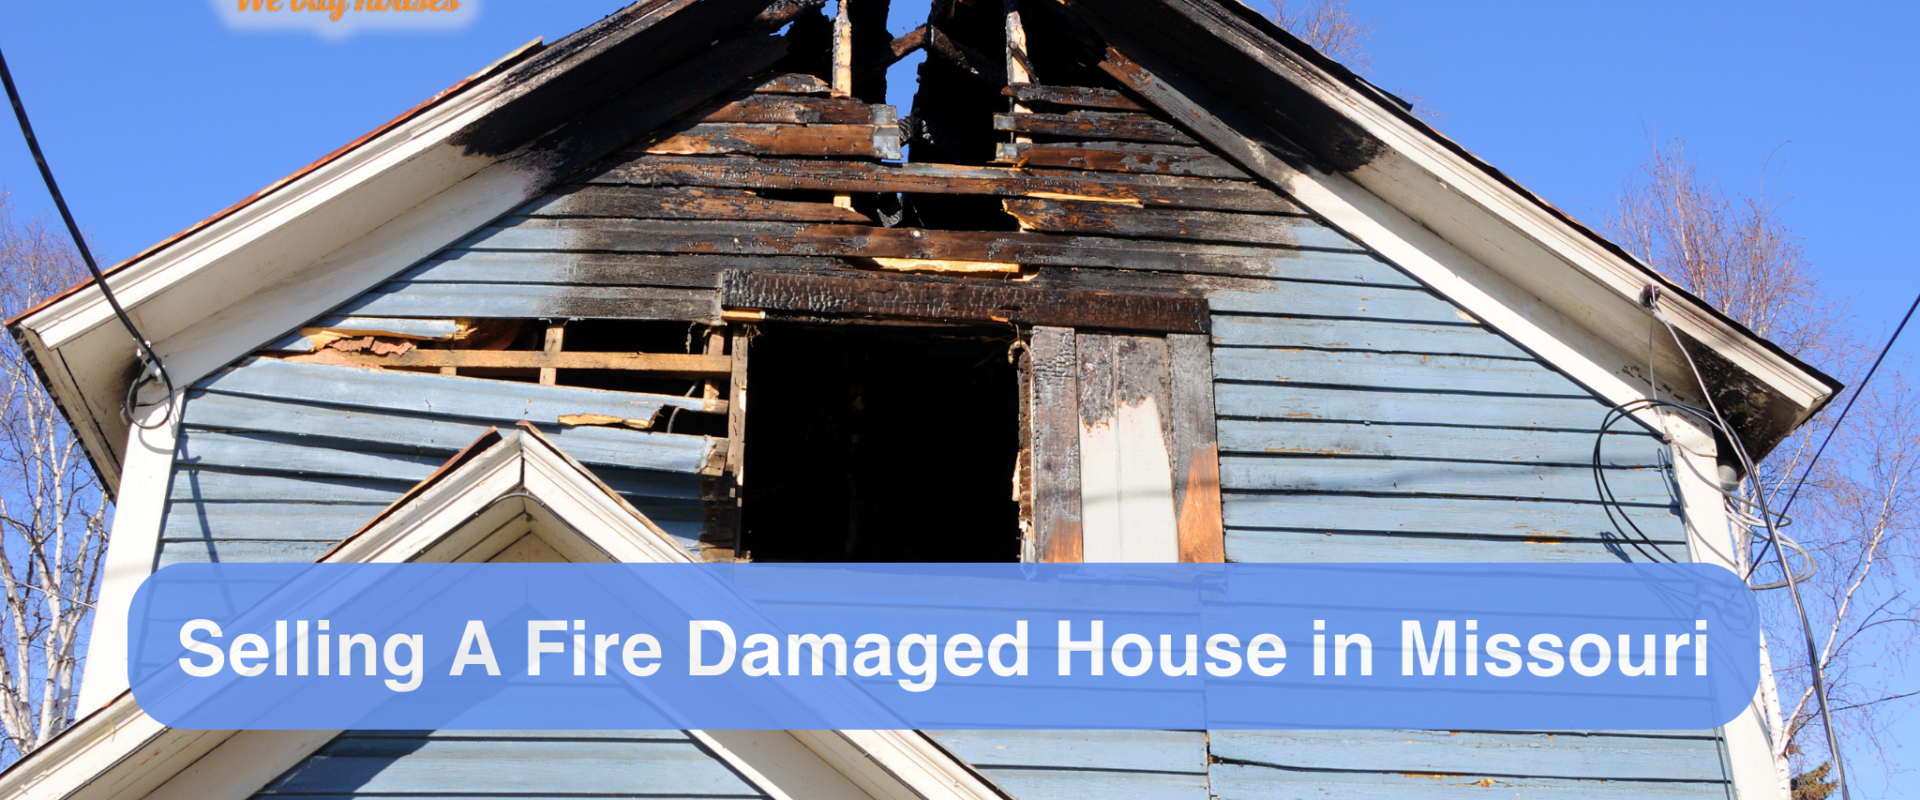 Sell Fire Damaged House in Missouri